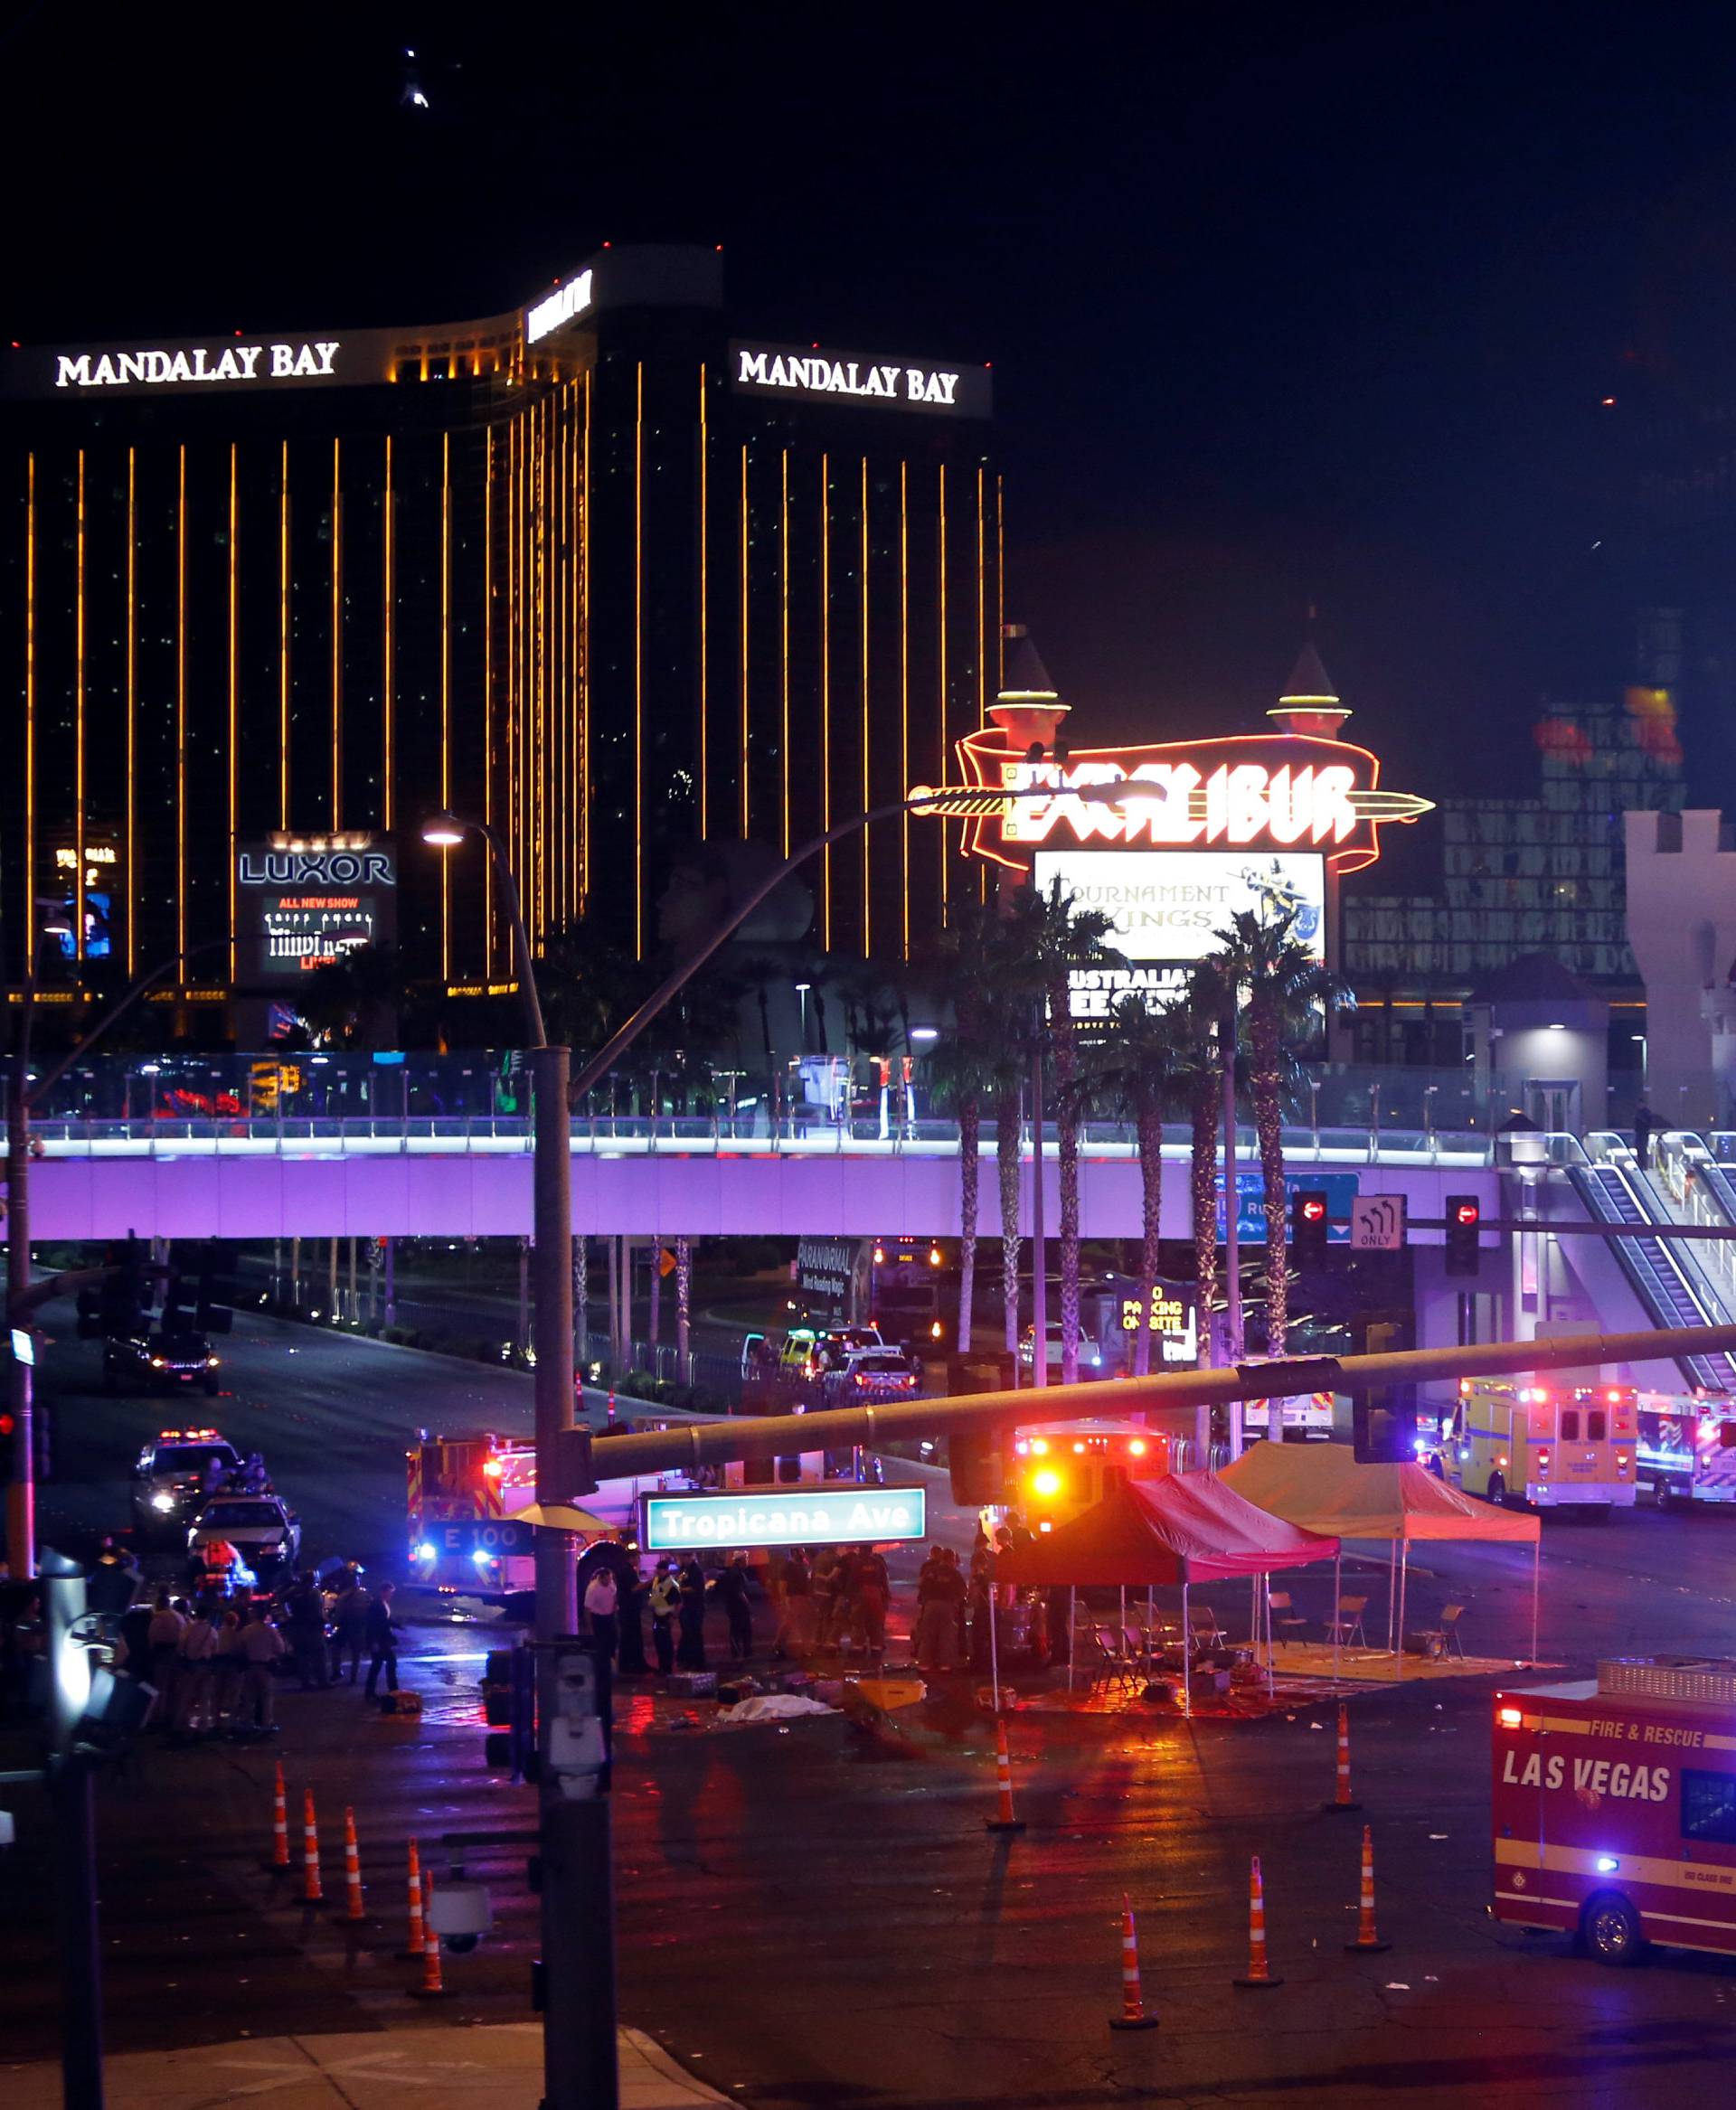 Las Vegas Metro Police and medical workers stage in the intersection of Tropicana Avenue and Las Vegas Boulevard South after a mass shooting at a music festival on the Las Vegas Strip in Las Vegas